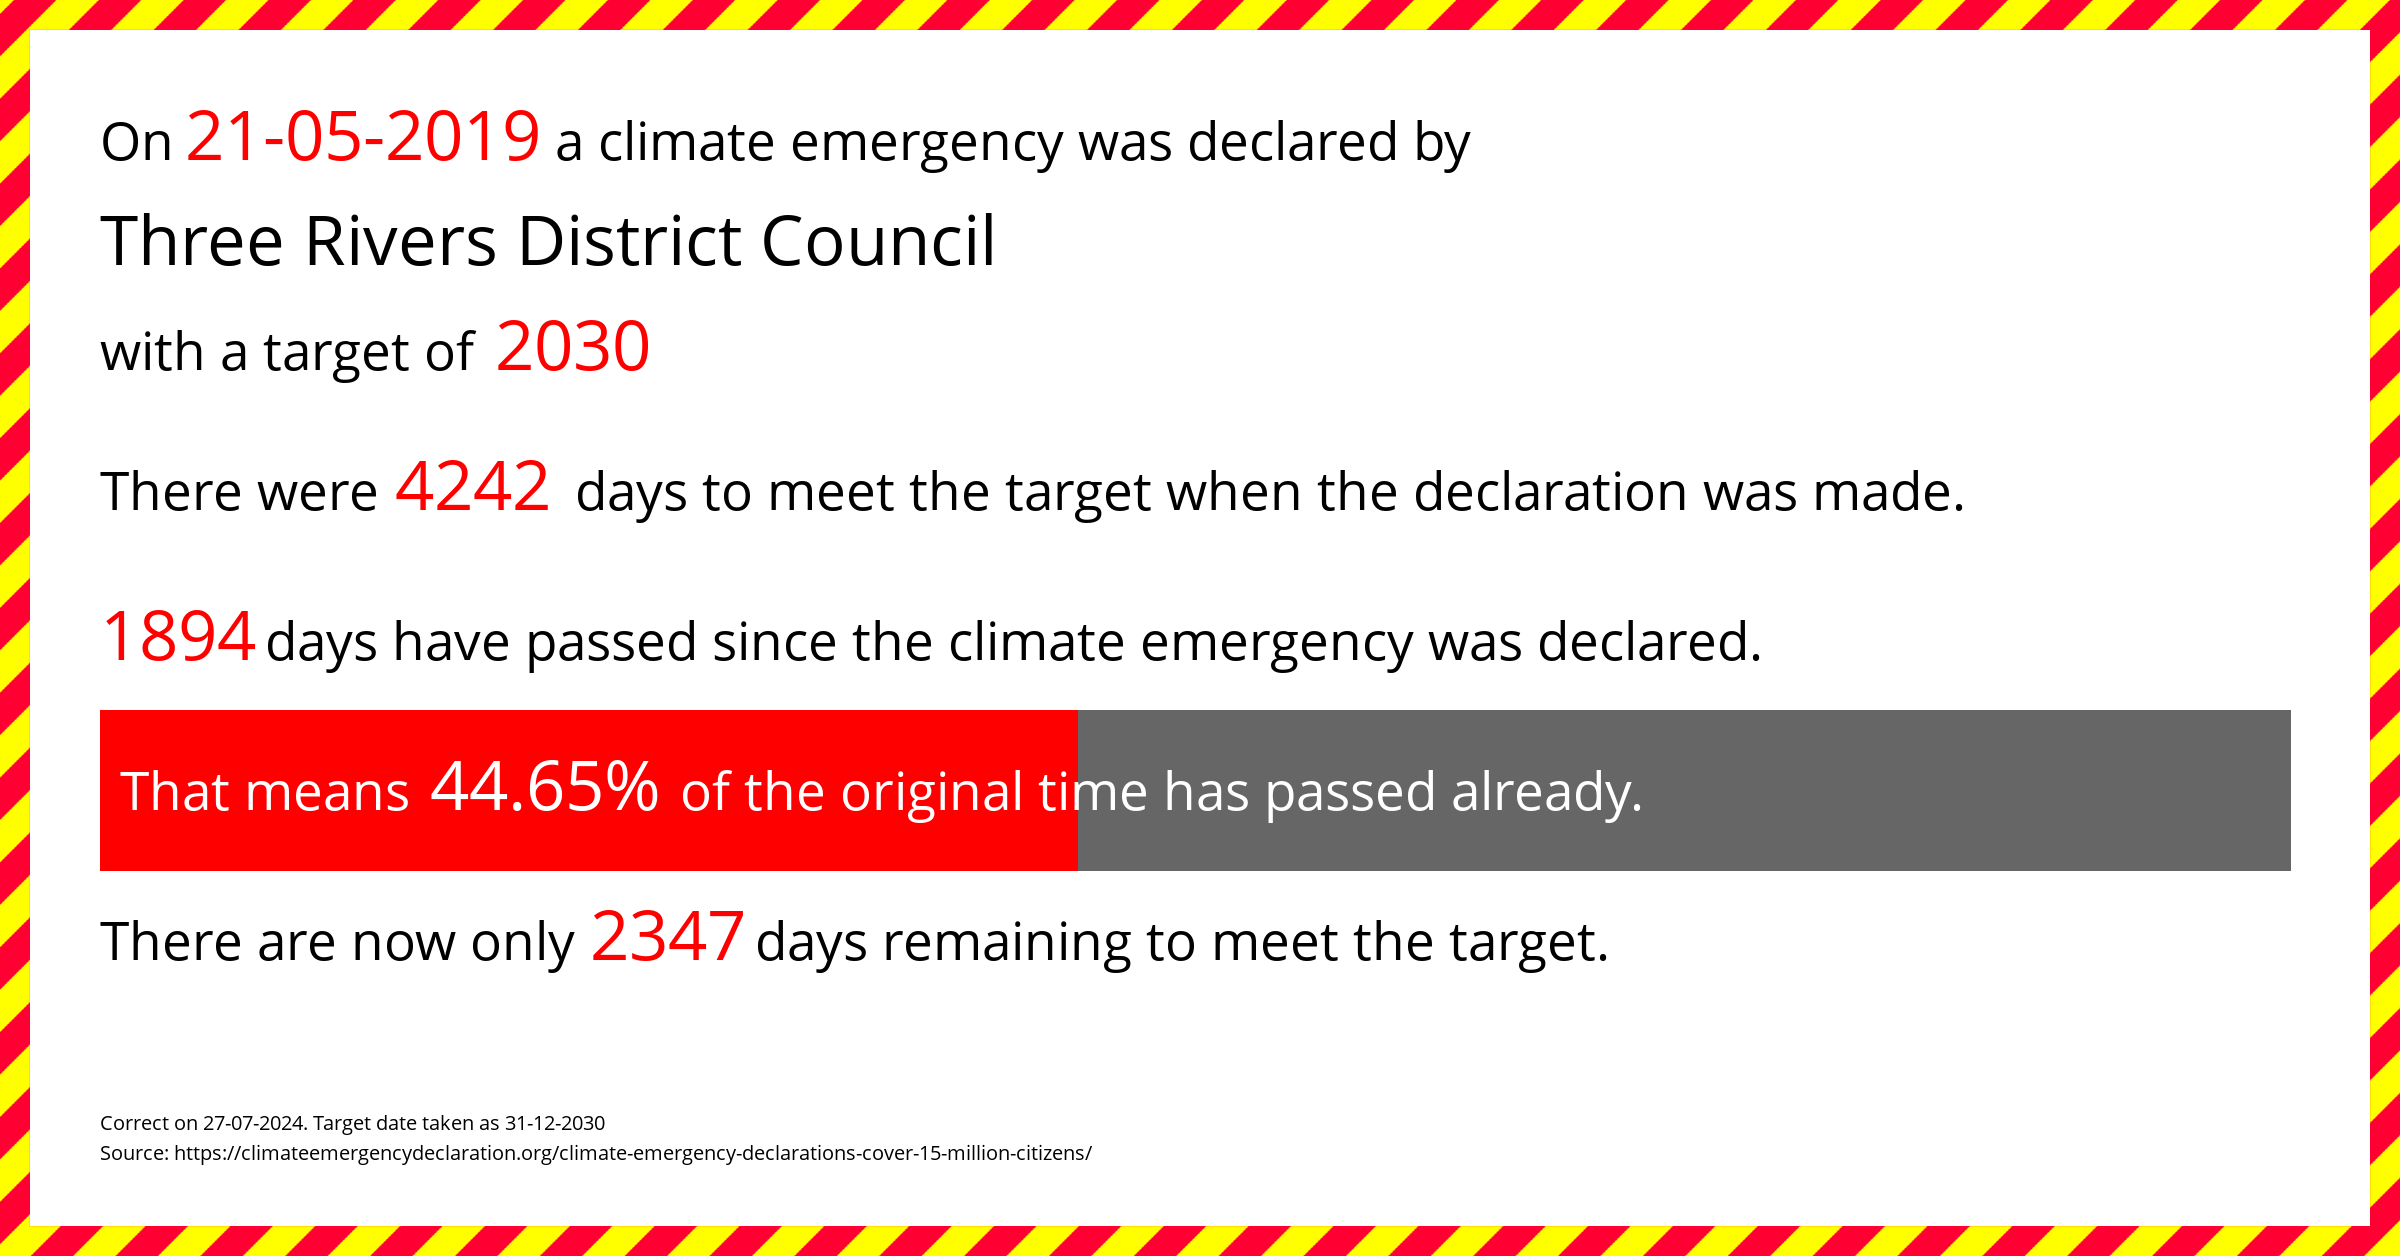 Three Rivers District Council declared a Climate emergency on Tuesday 21st May 2019, with a target of 2030.